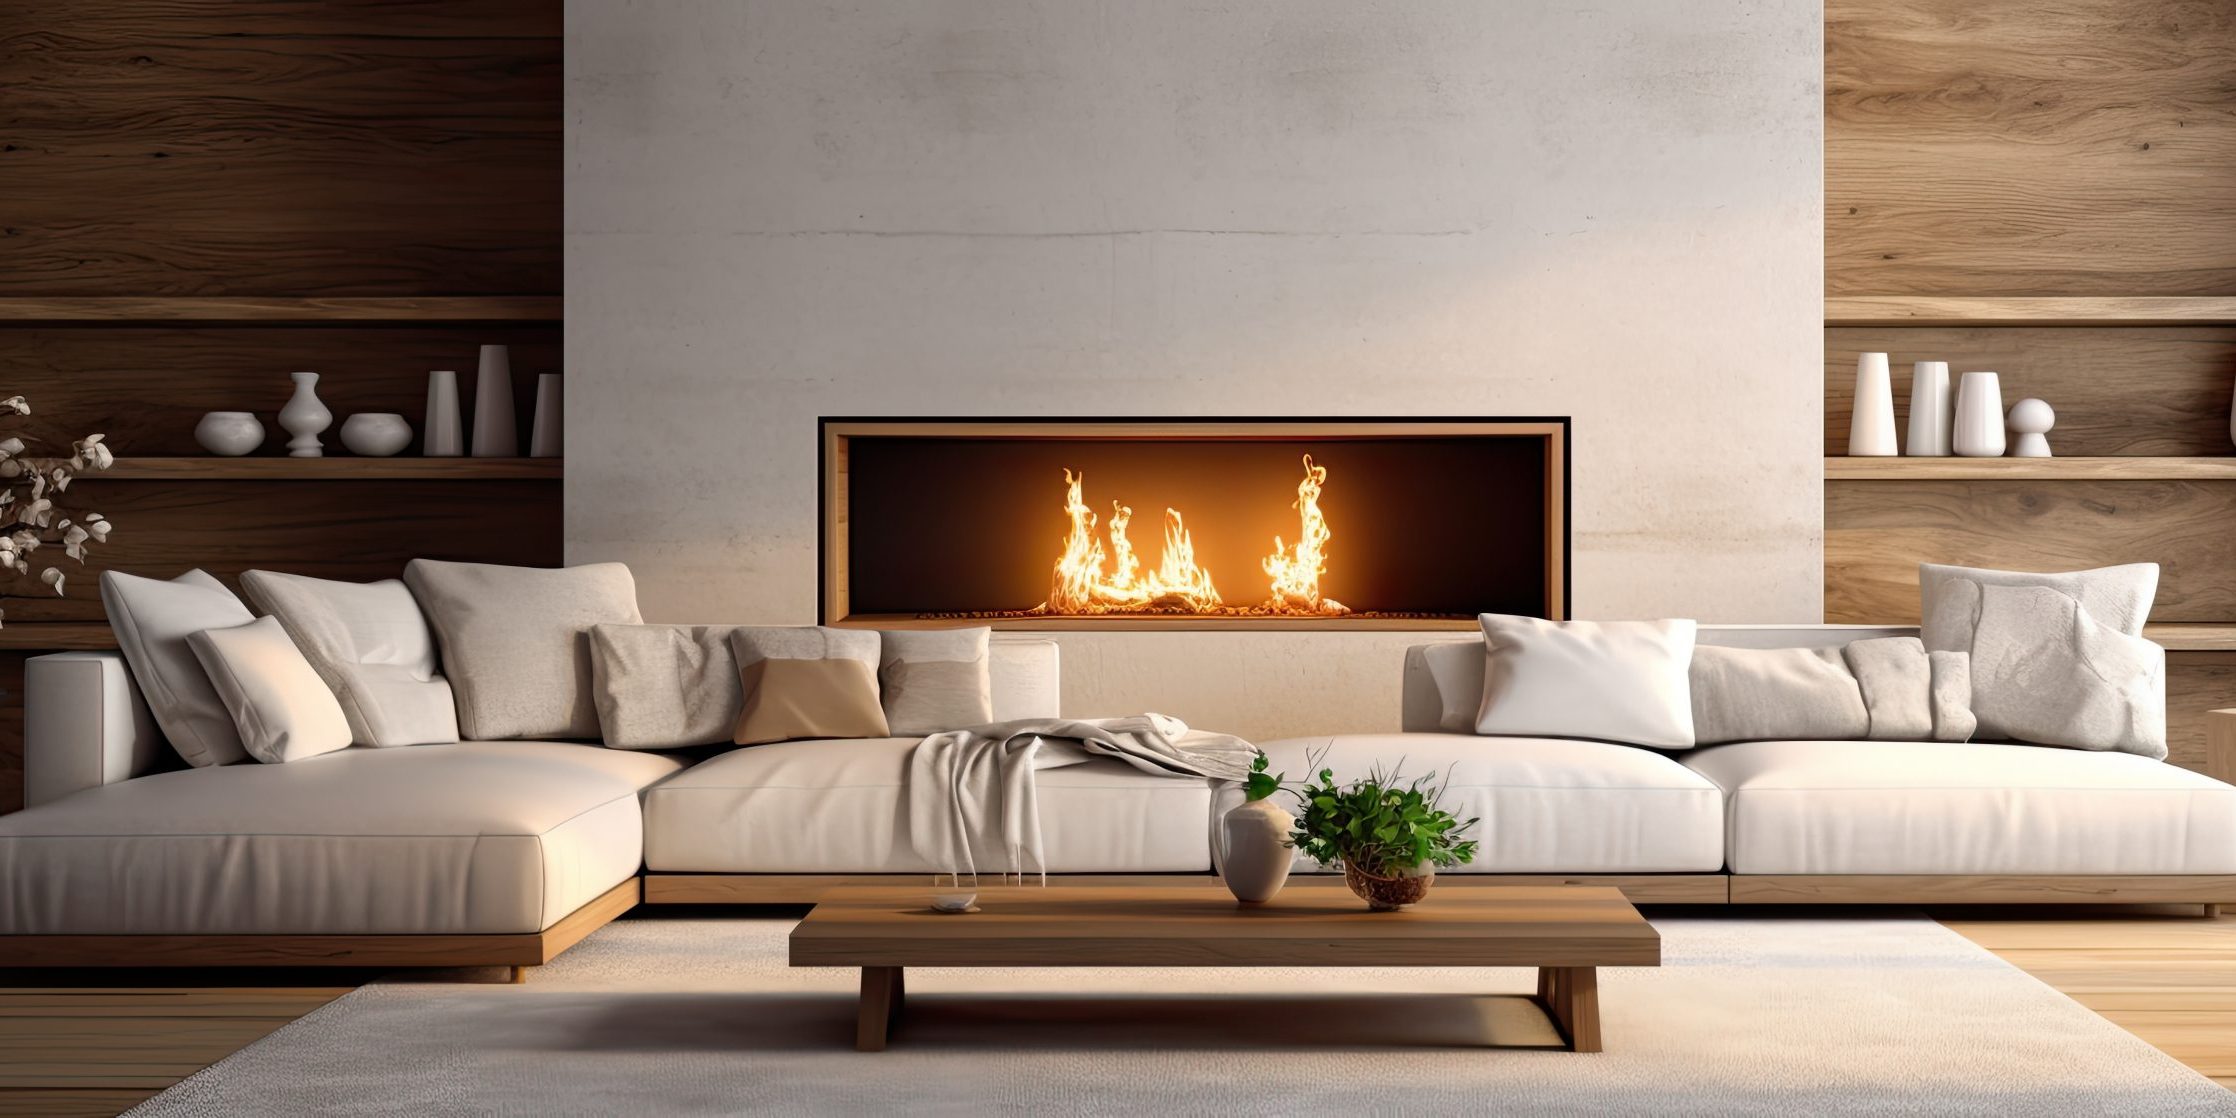 Modern elegant and luxurious interior design creating a warm and bright living room ambiance with a fireplace wood furniture and ample seating space With copyspace for text